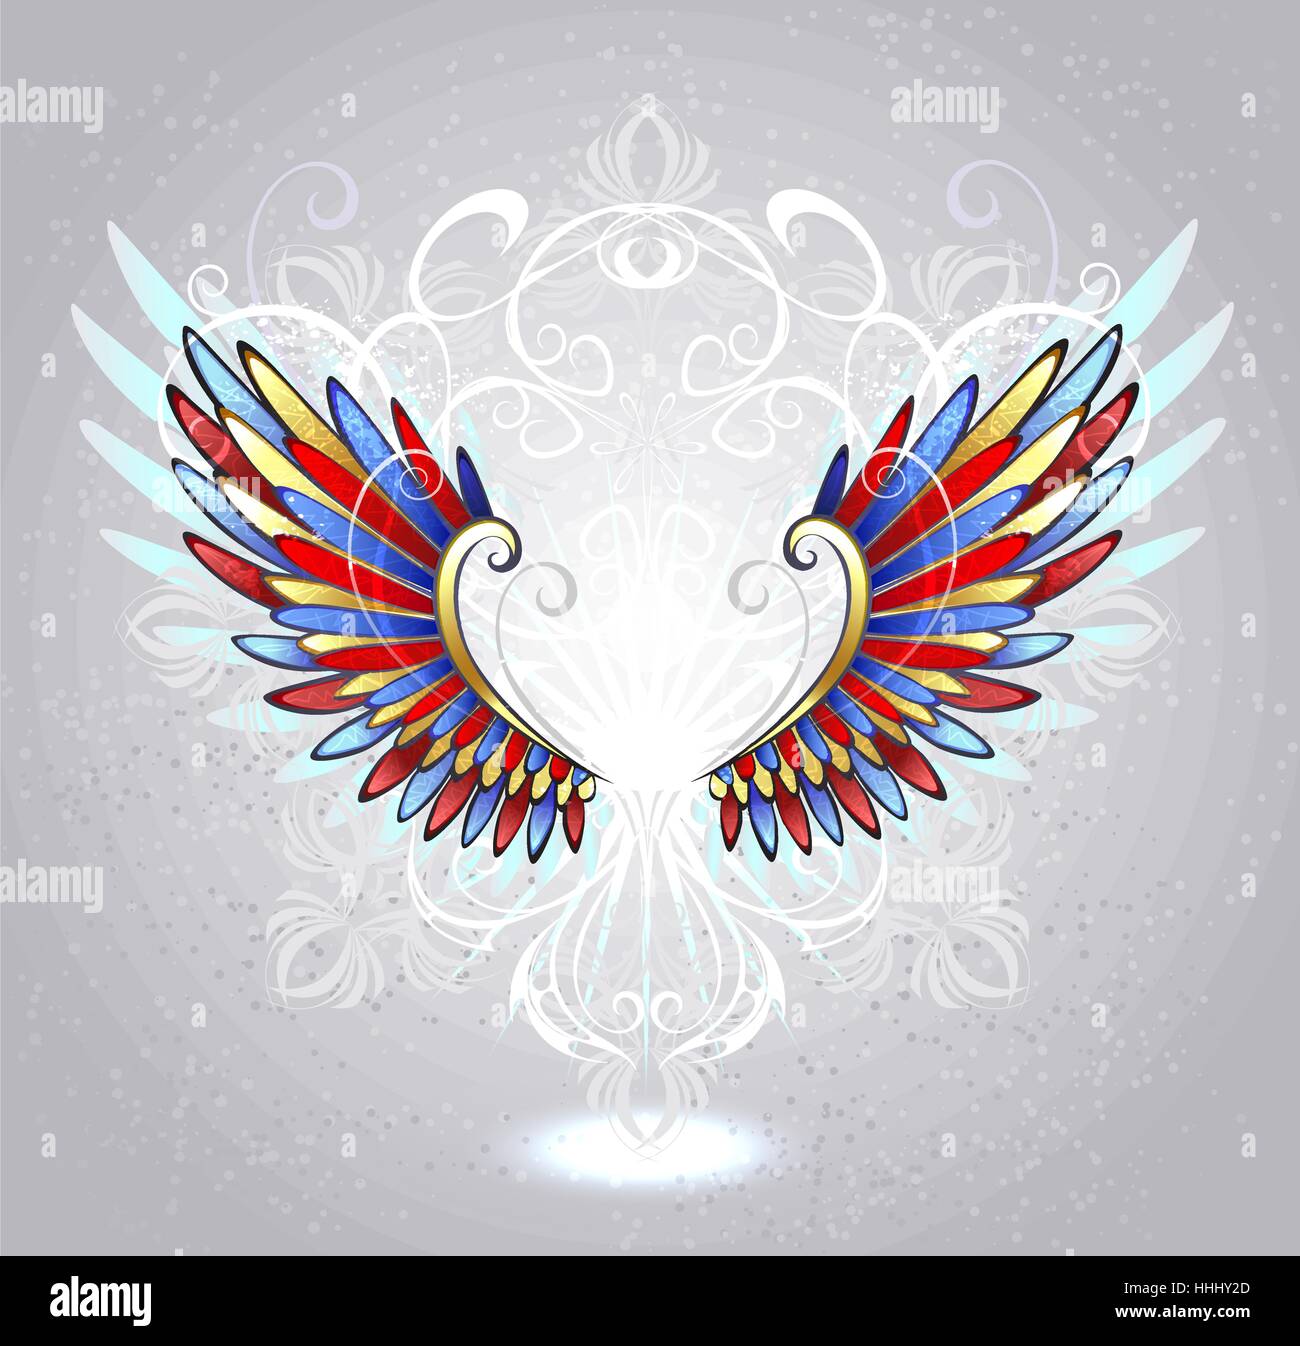 Stained glass wings of red, blue and yellow glass , decorated with a white pattern on a light background. Stock Vector